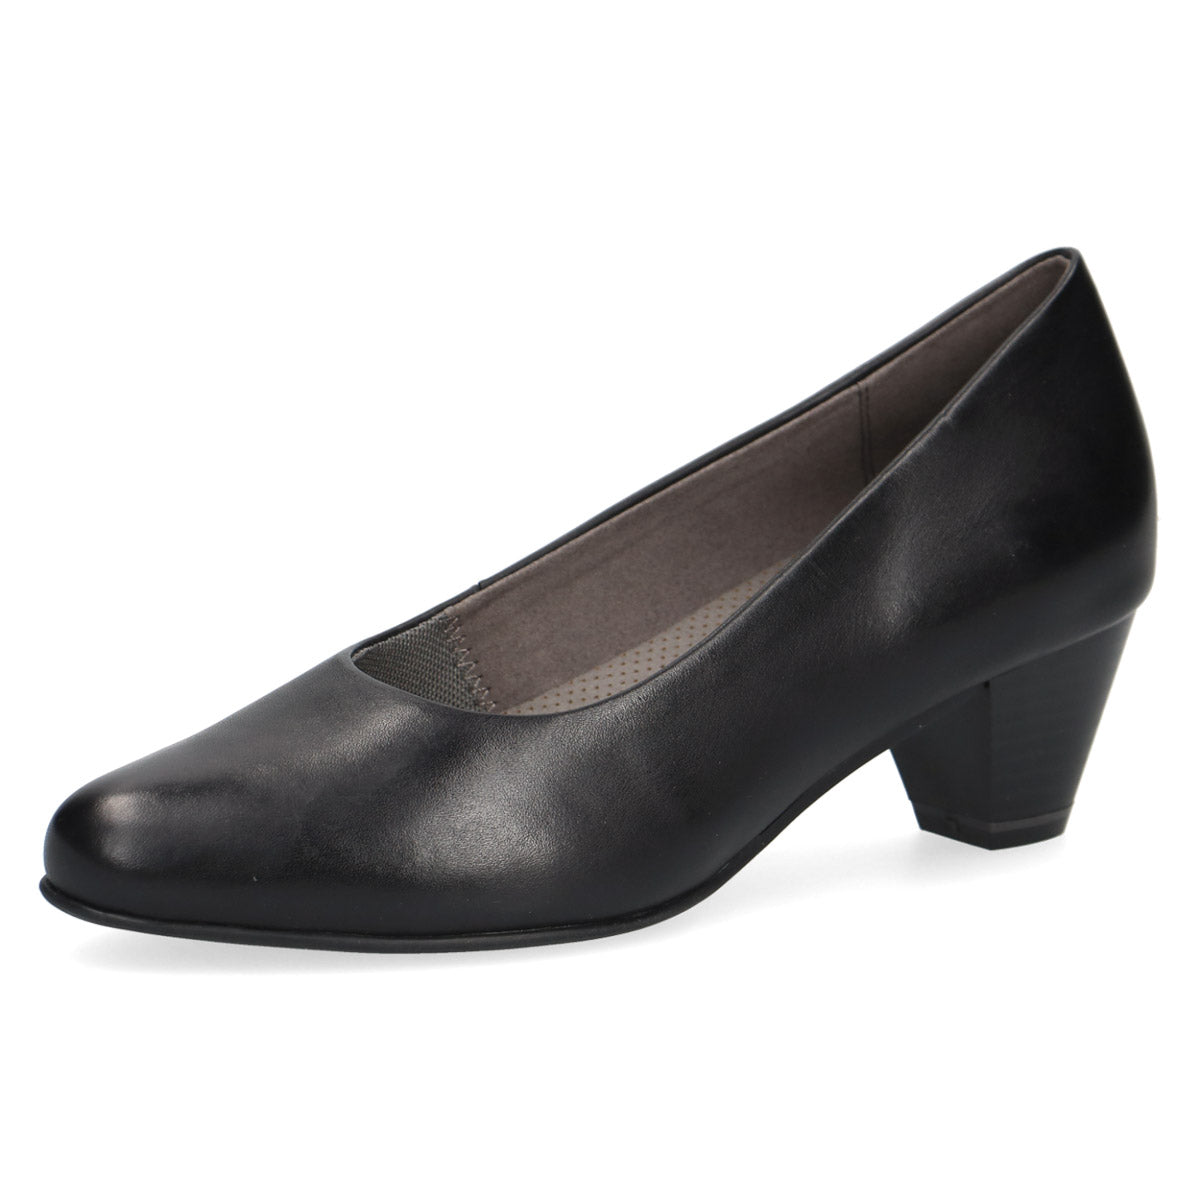 Sophisticated Statement Black Leather Pumps